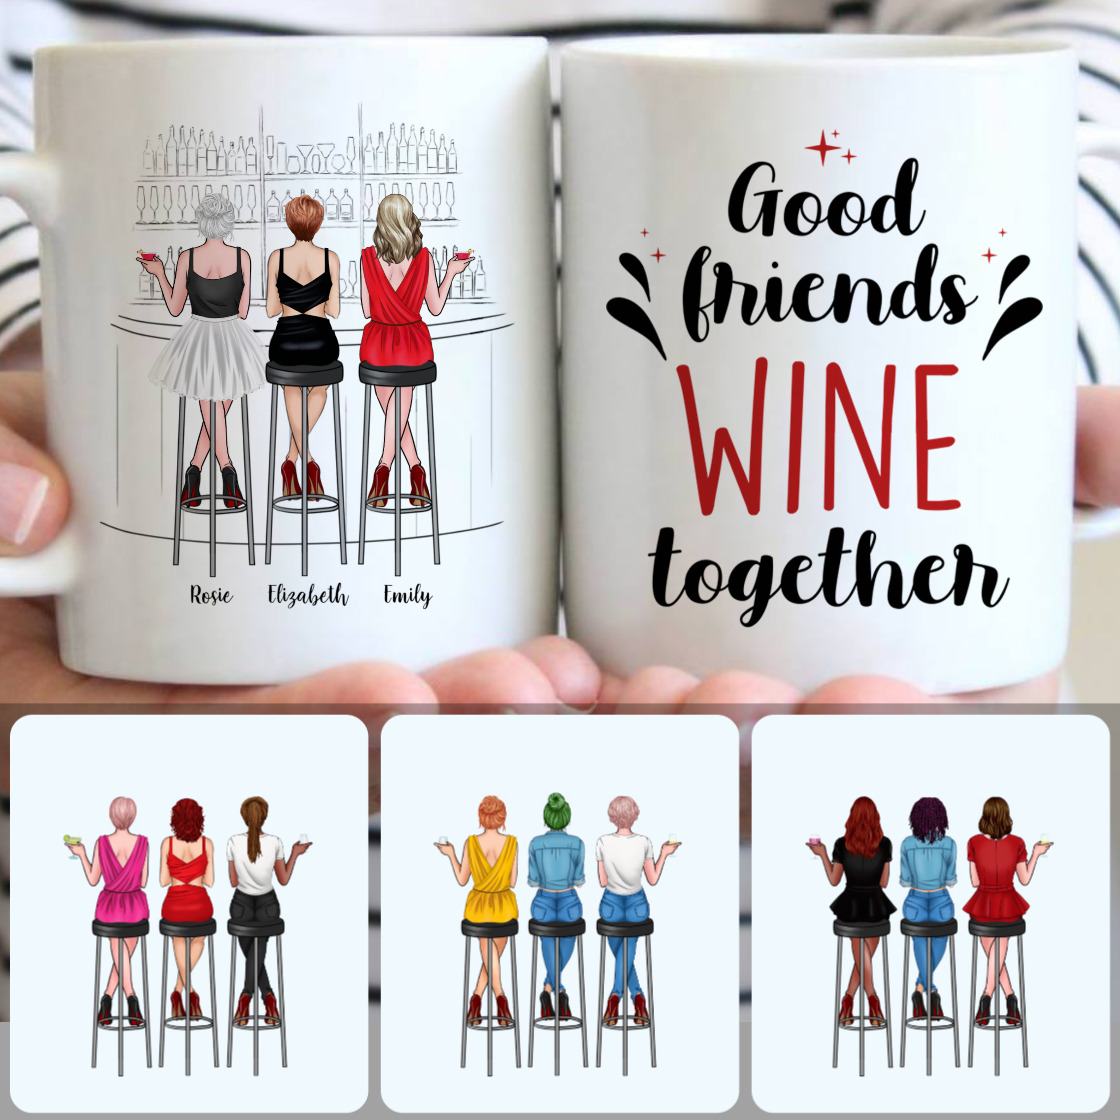 Personalized Mug, Best Birthday Gifts, 3 Good Friends Wine Together Customized Coffee Mug With Names